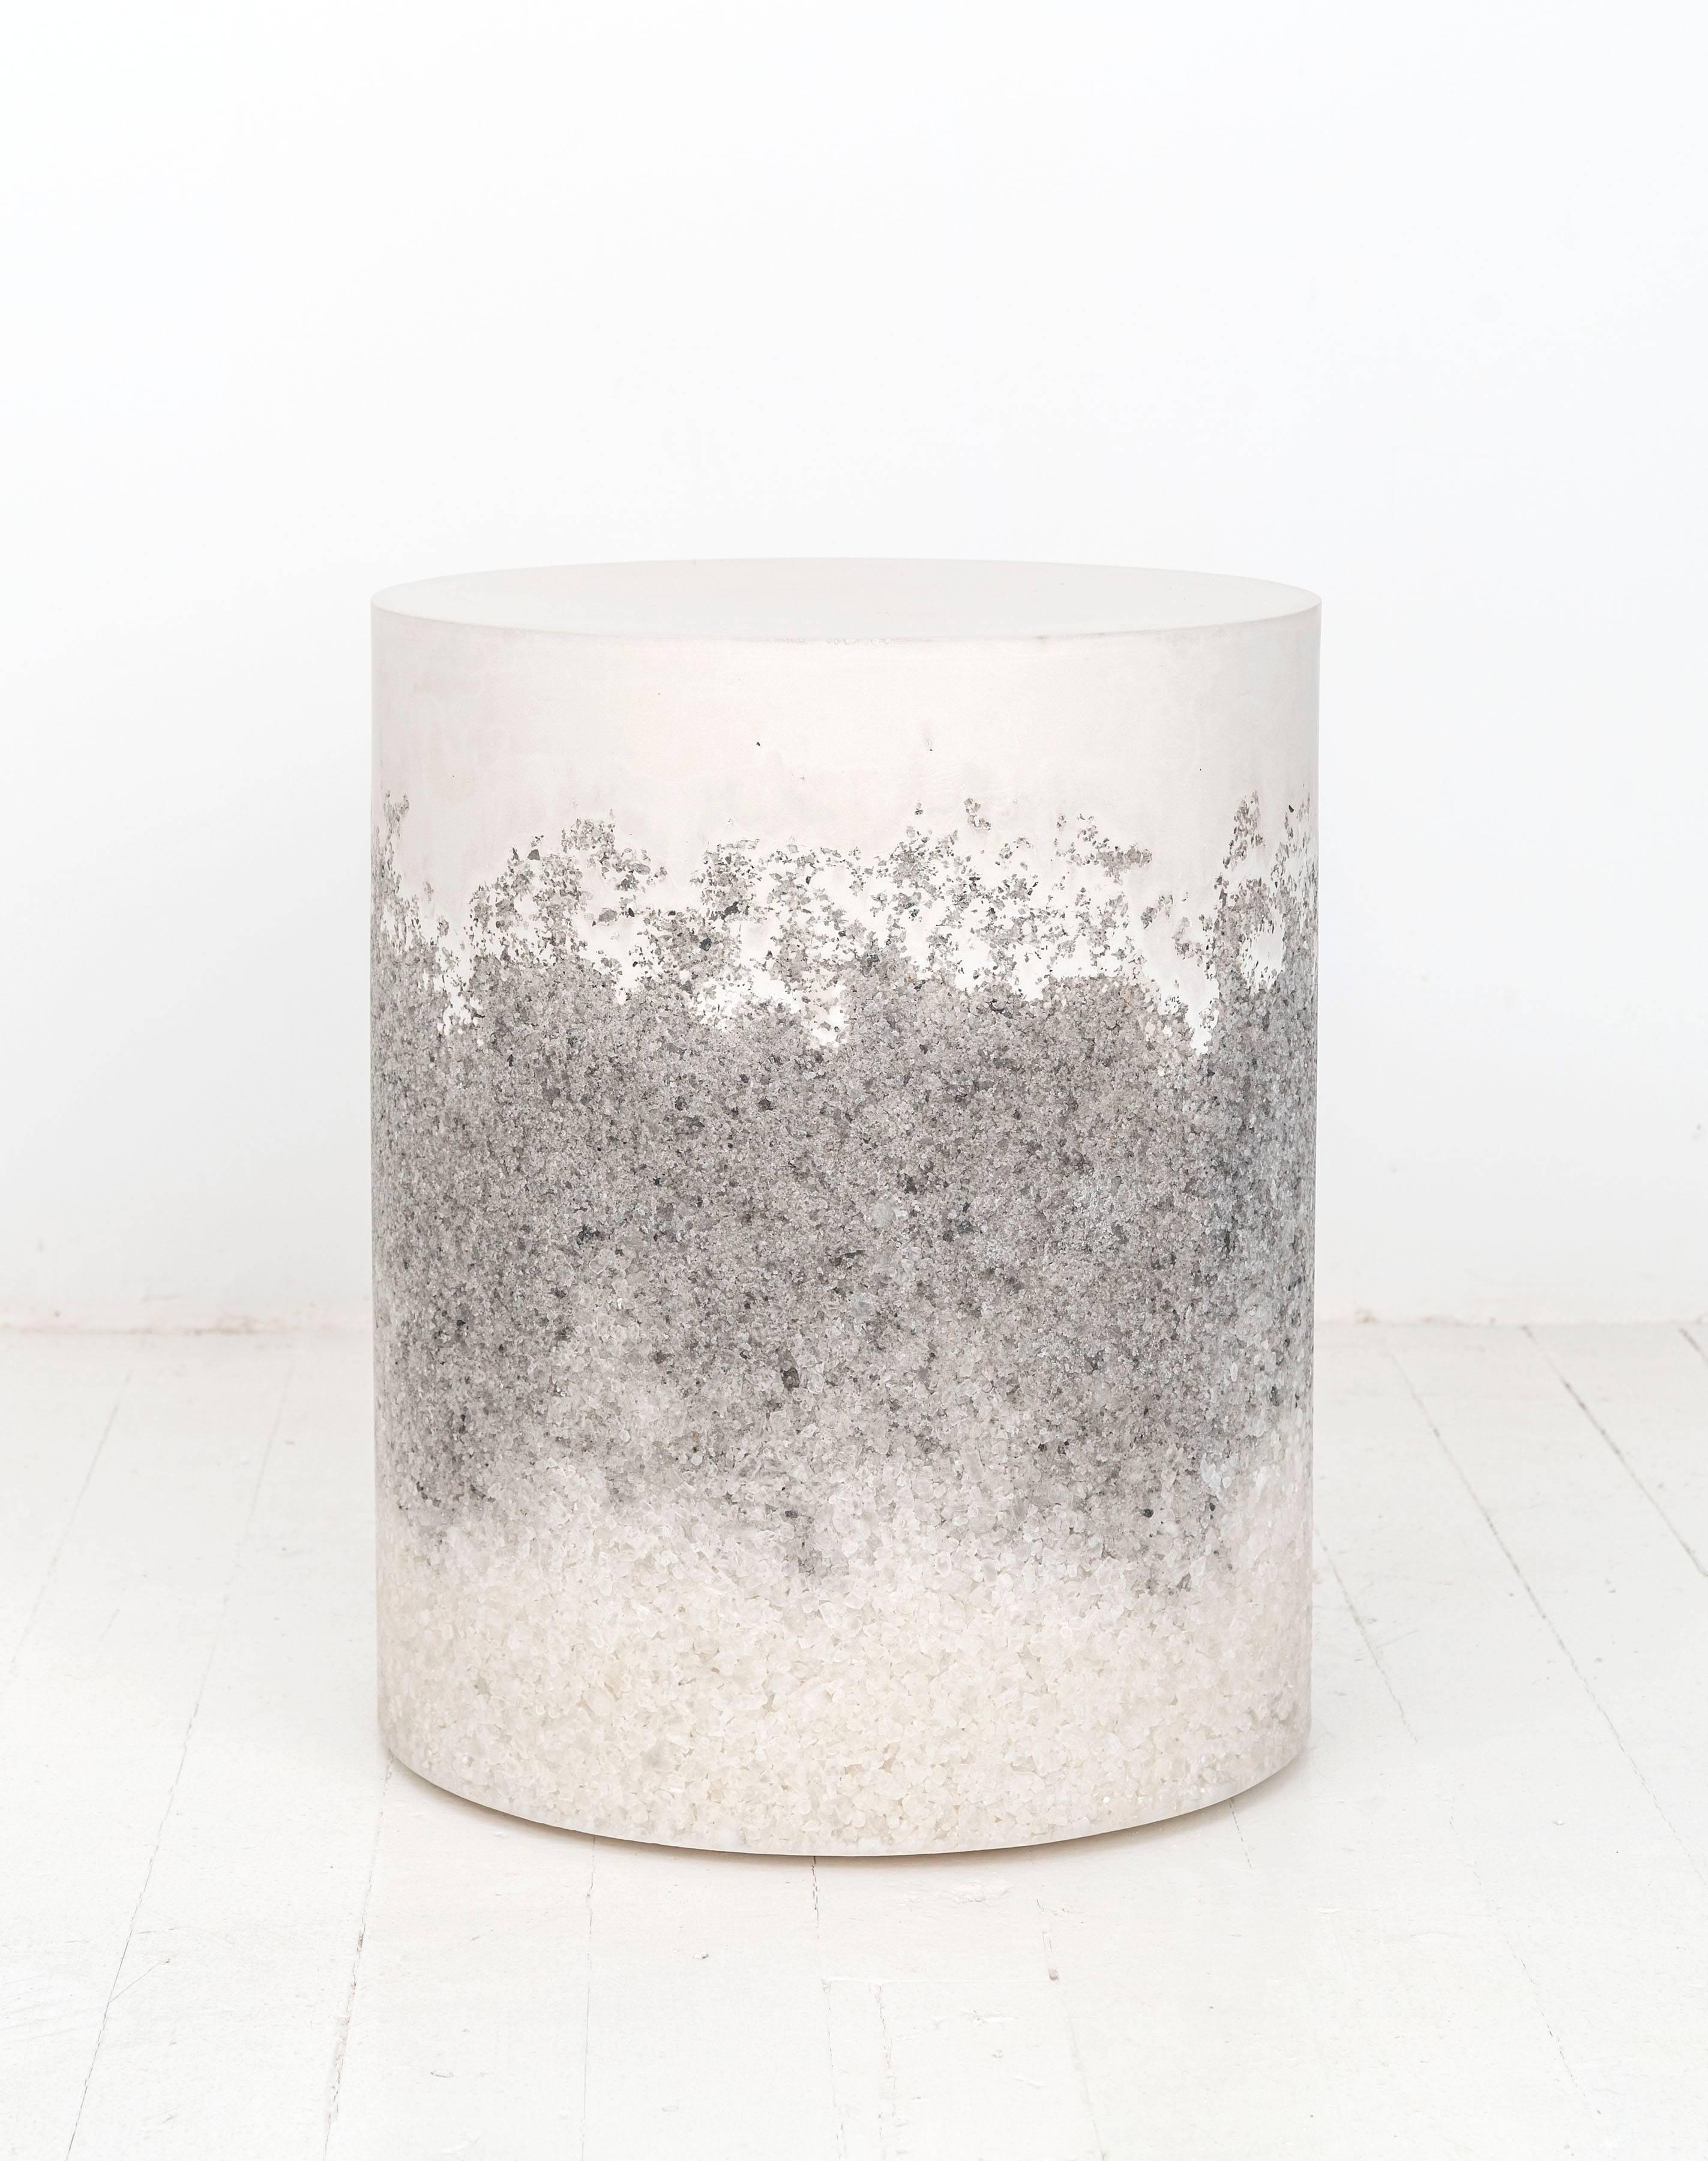 This made-to-order drum consists of a hand-dyed raw cement top with a packed grey rock salt center and a packed white rock salt bottom. The cement is poured by hand over the salts, creating an organic blend of the materials. The piece has a hollow